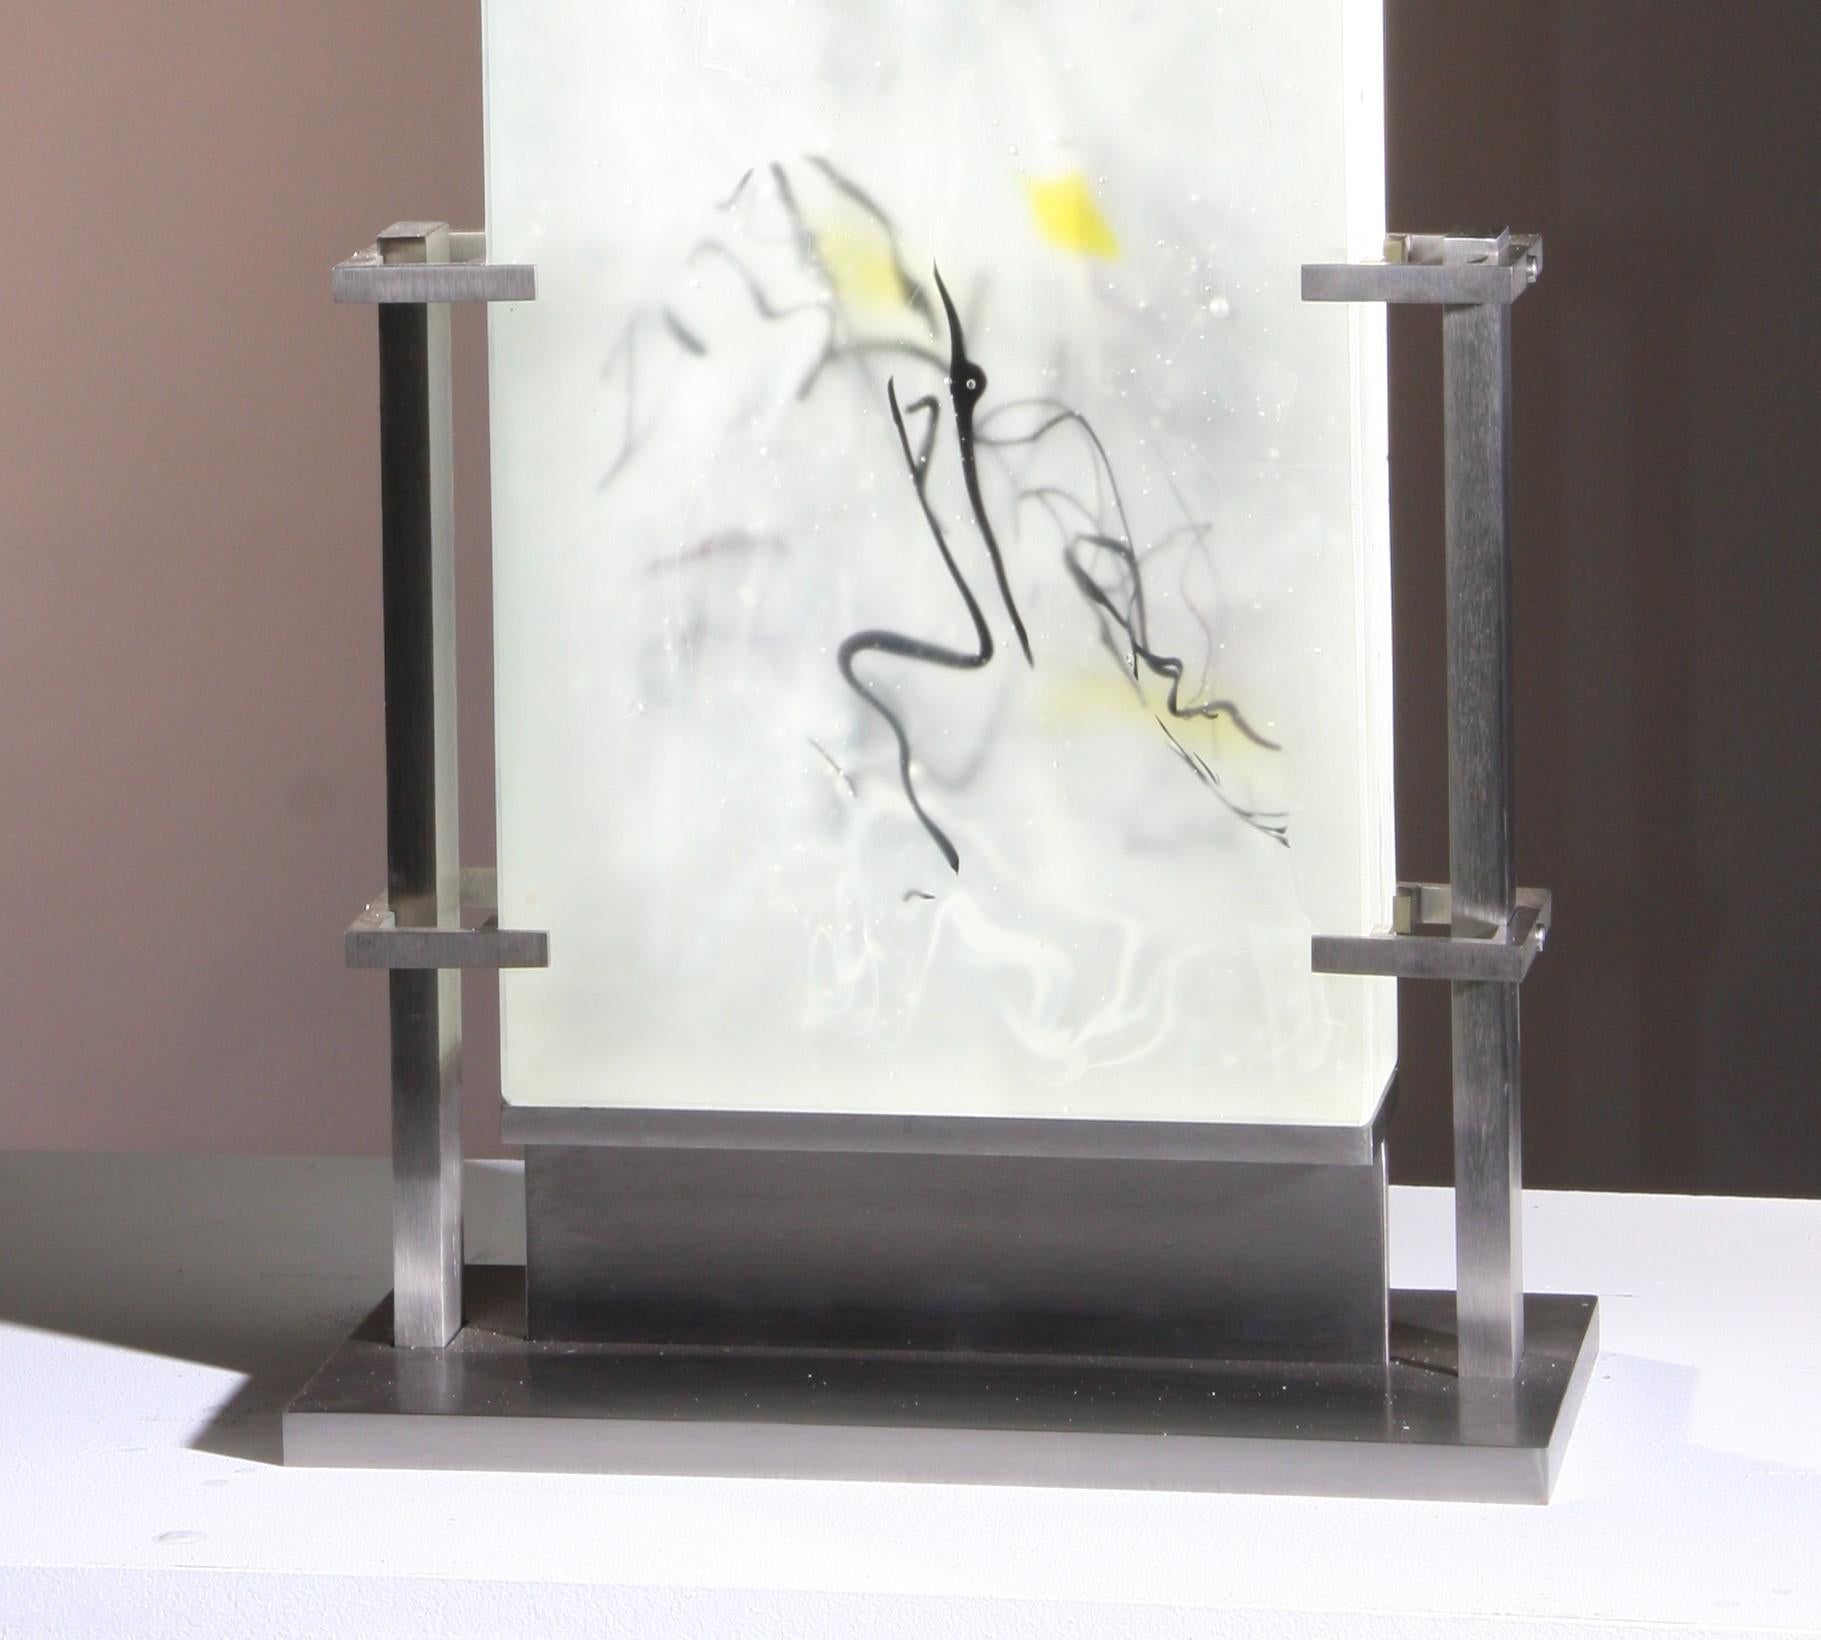 Abstract Cast Glass Sculpture, 'Kulaykili', 2008 by David Ruth For Sale 3